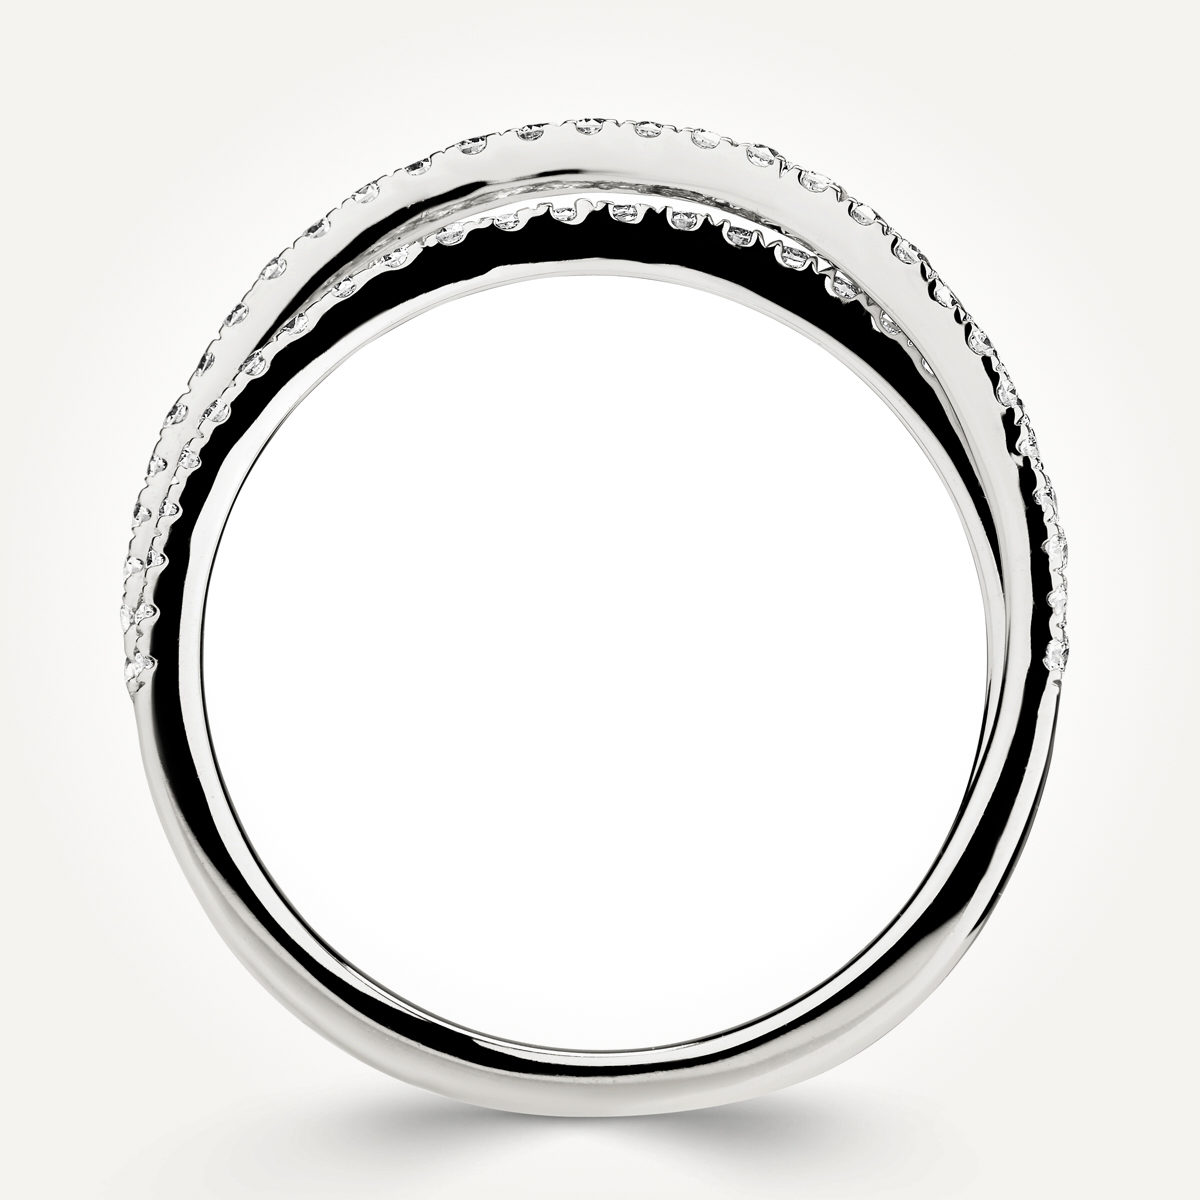 14KT White Gold Double Row Twist Ring